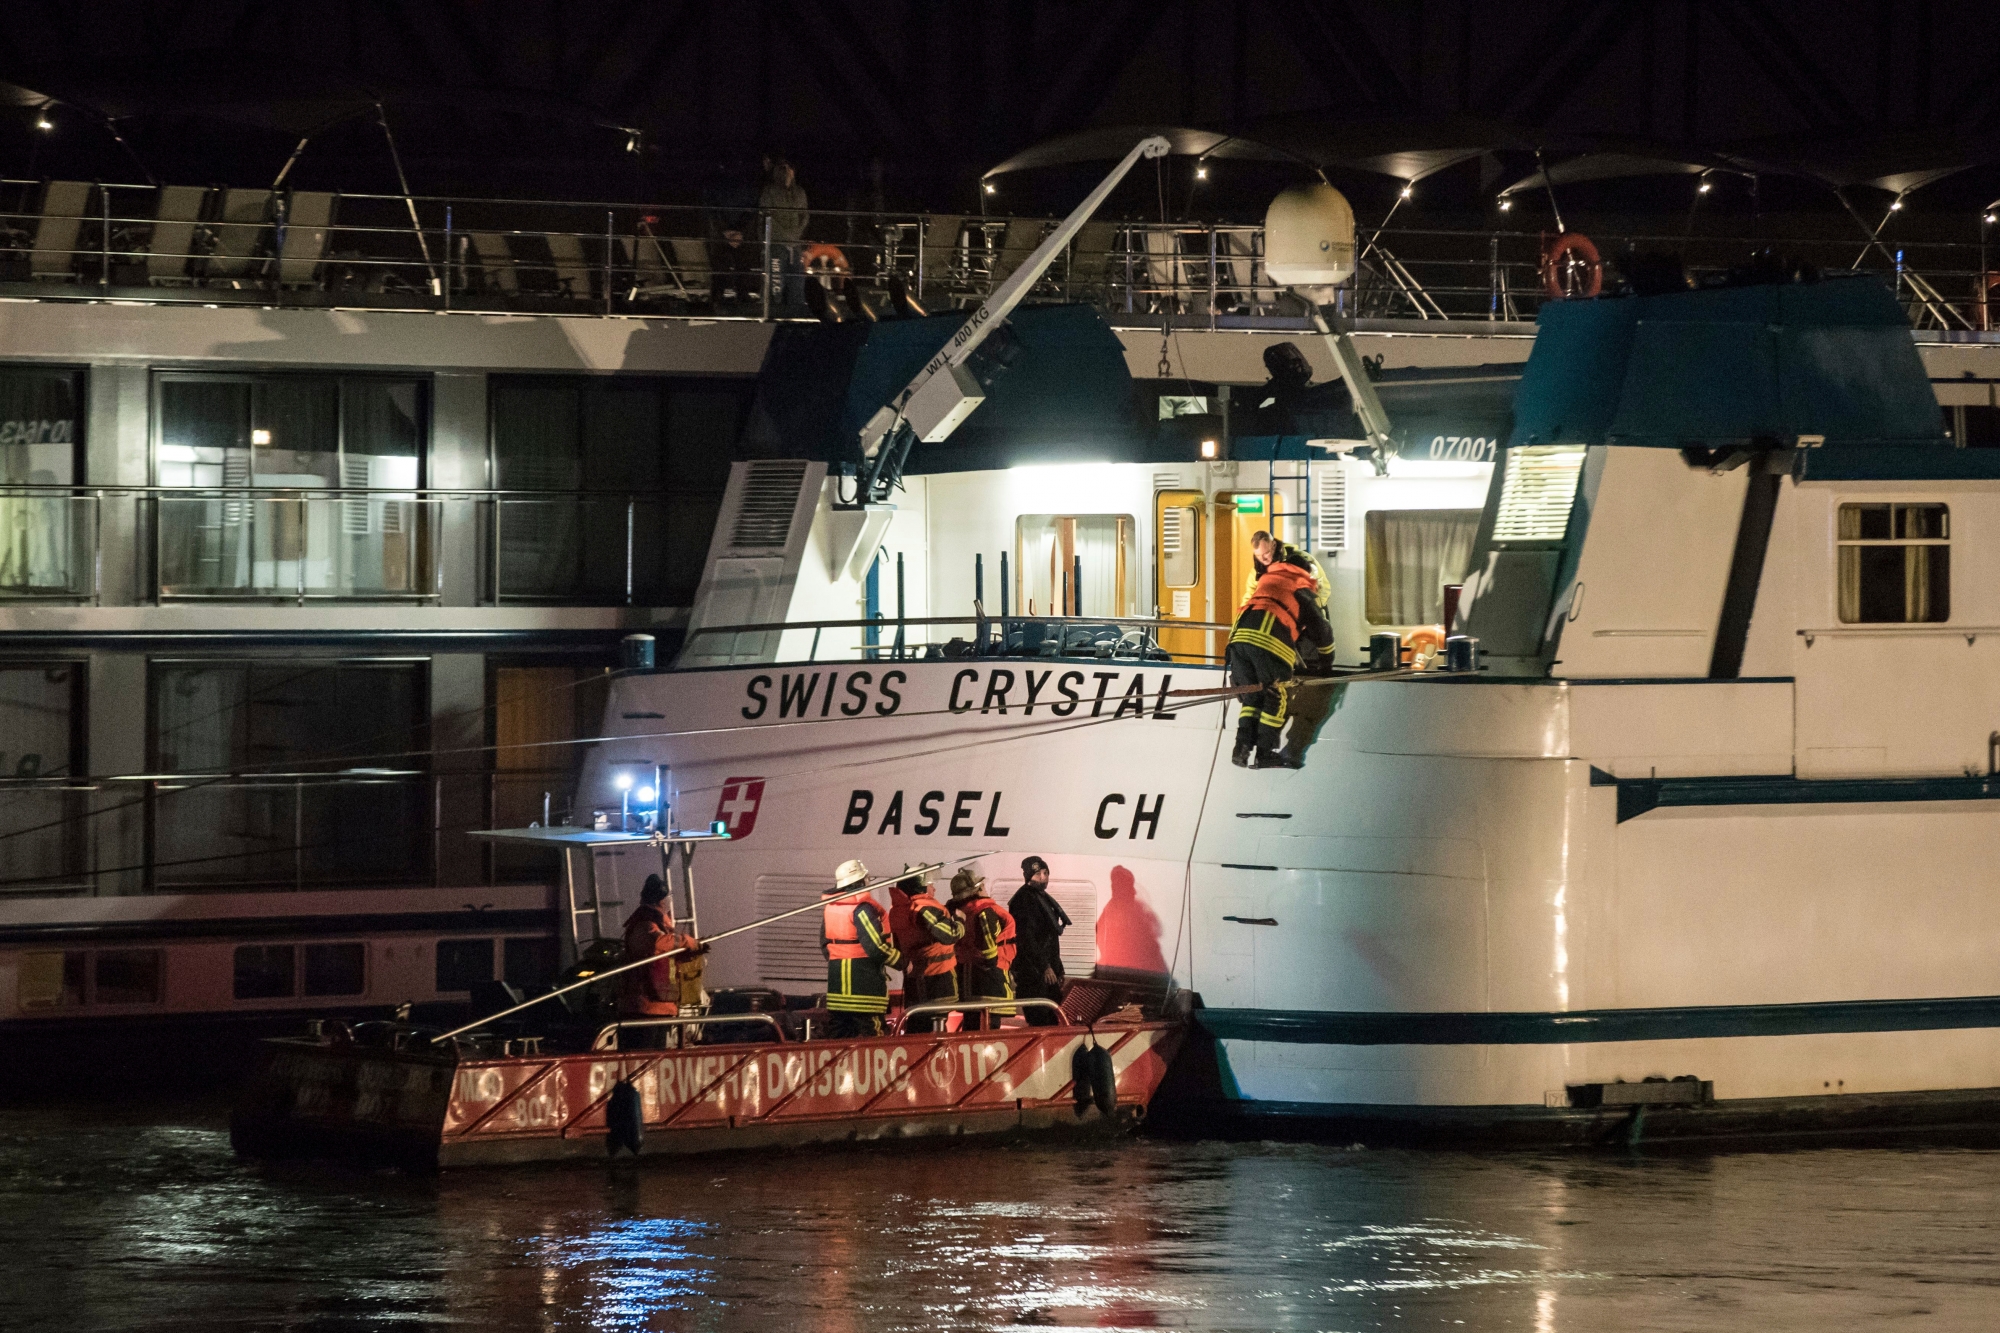 In this Dec. 26, 2017 photo rescuers arrive at a tourist ship  in Duisburg, Germany. A tourist ship has struck a highway bridge on the Rhine river in western Germany. Police say 27 people are injured. The Swiss Crystal, which news agency dpa reports was en route to the Netherlands, hit a pillar of the bridge near Duisburg on Tuesday evening. (Marcel Kusch/dpa via AP) GERMANY SHIP HITS BRIDGE